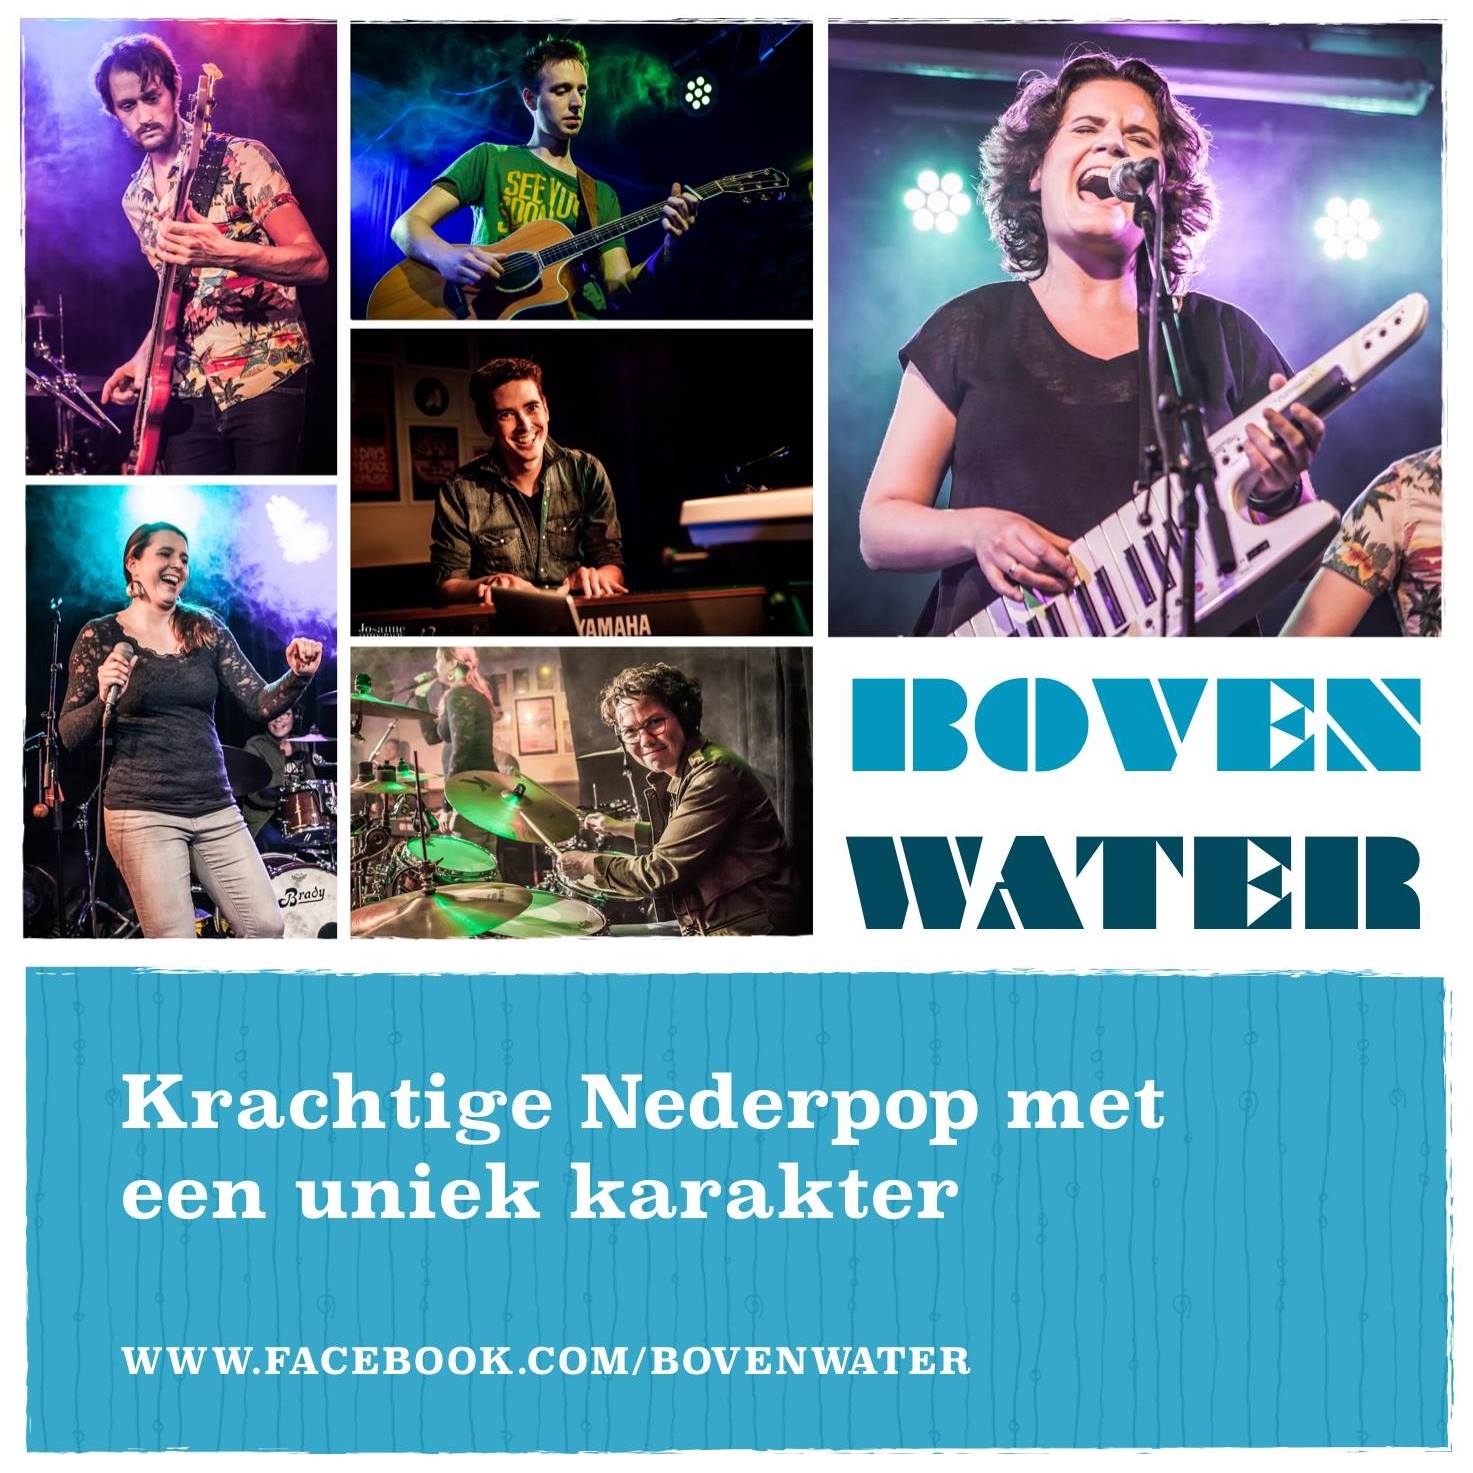 Boven Water